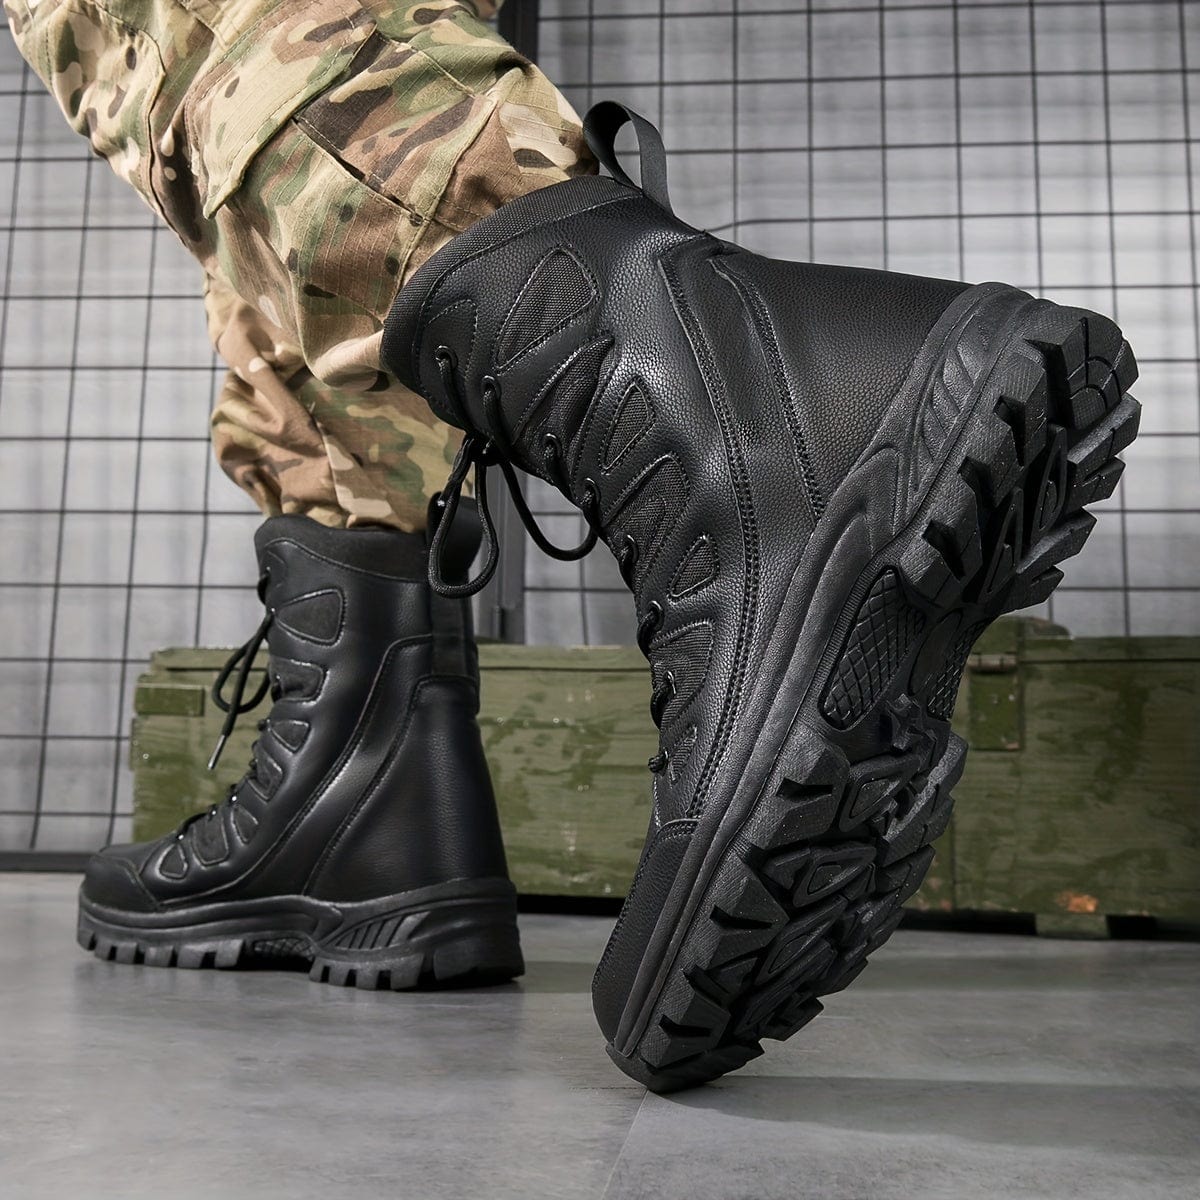 Men's Rugged Combat Boots, Casual Lace-up Walking Hiking Outdoor Shoes, Army Boots